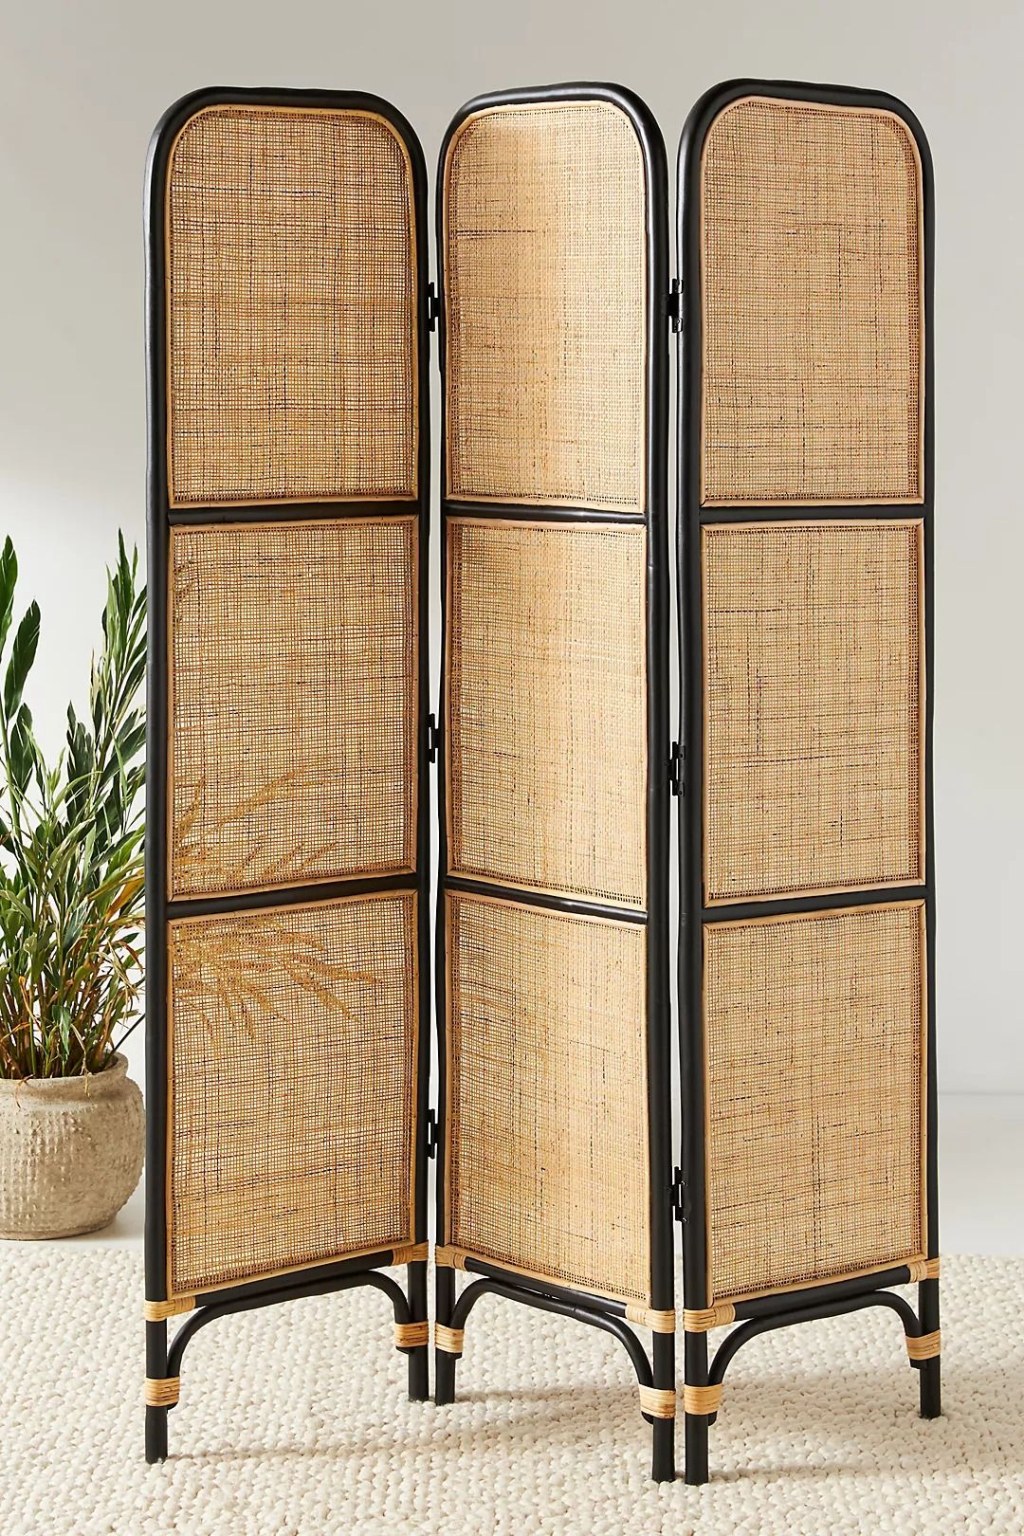 Picture of: Scarlett Rattan Room Divider Screen  Room divider, Room divider